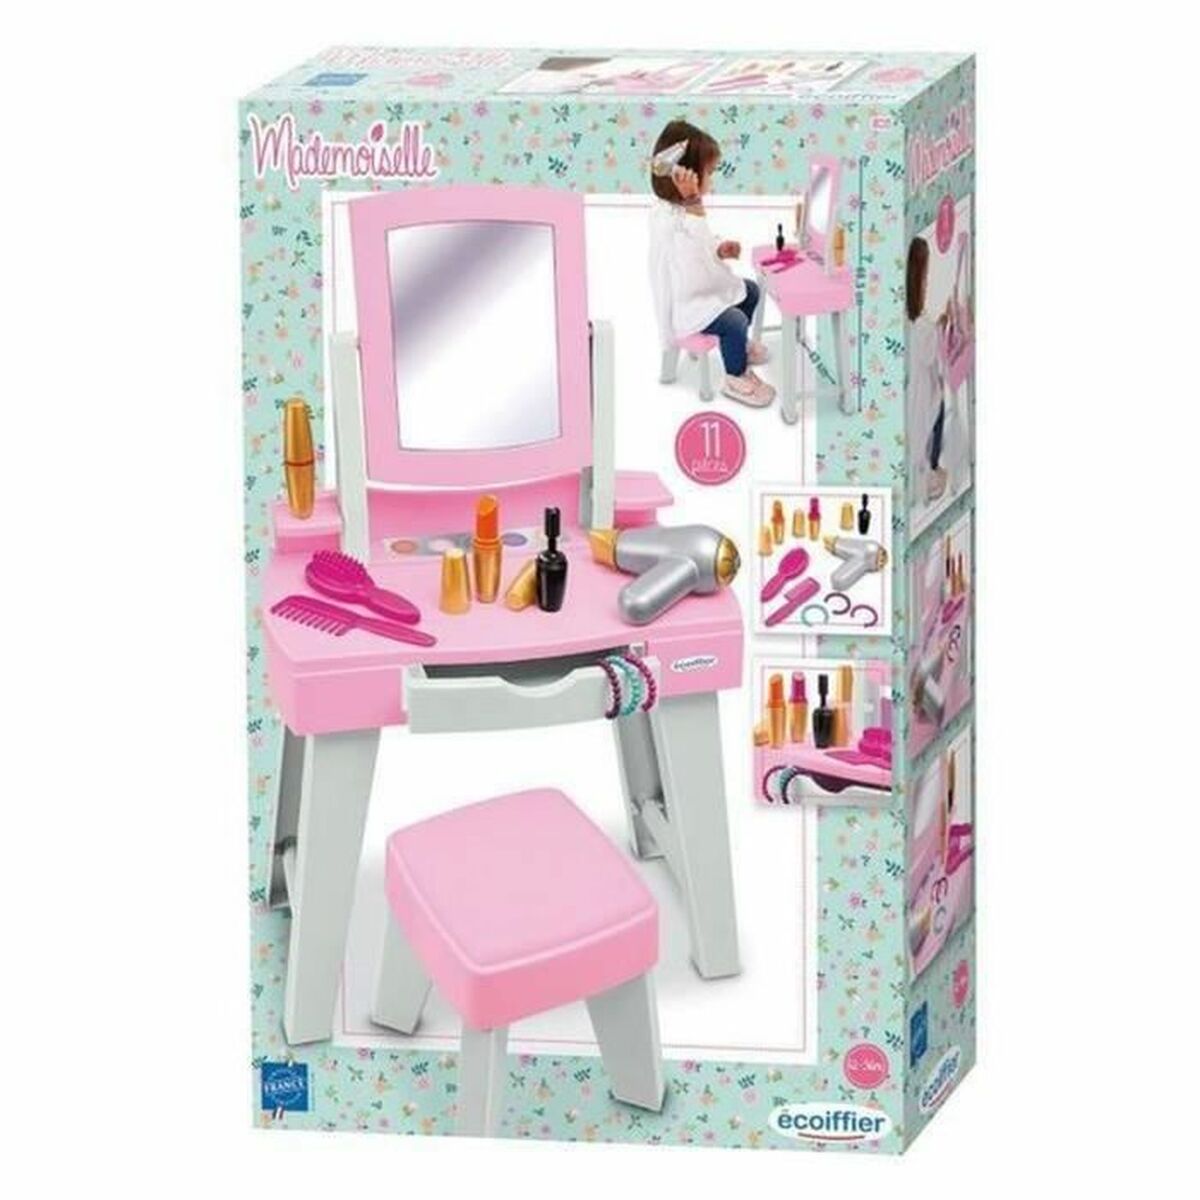 Interaktives Spielzeug Ecoiffier My first dressing table